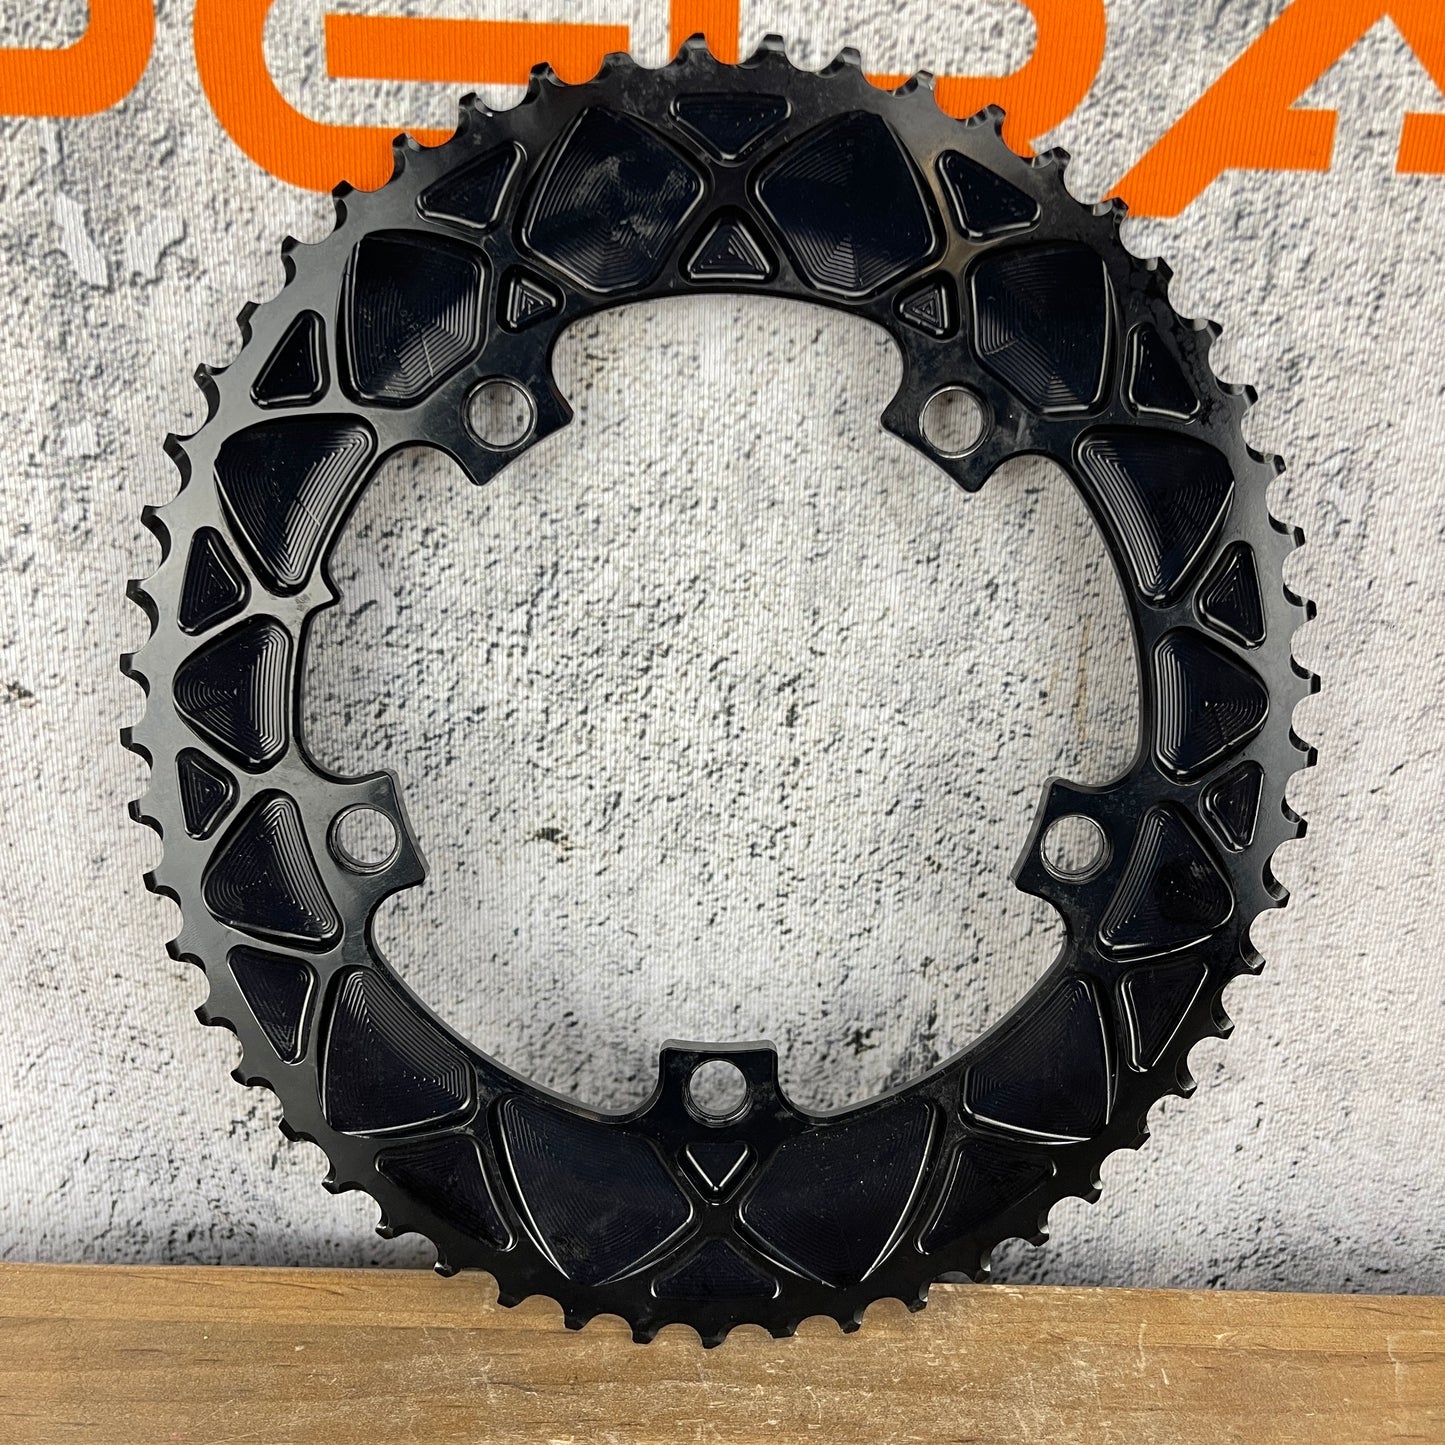 Absolute Black Premium Oval 5-Bolt 130BCD 53/39t Chainrings Set